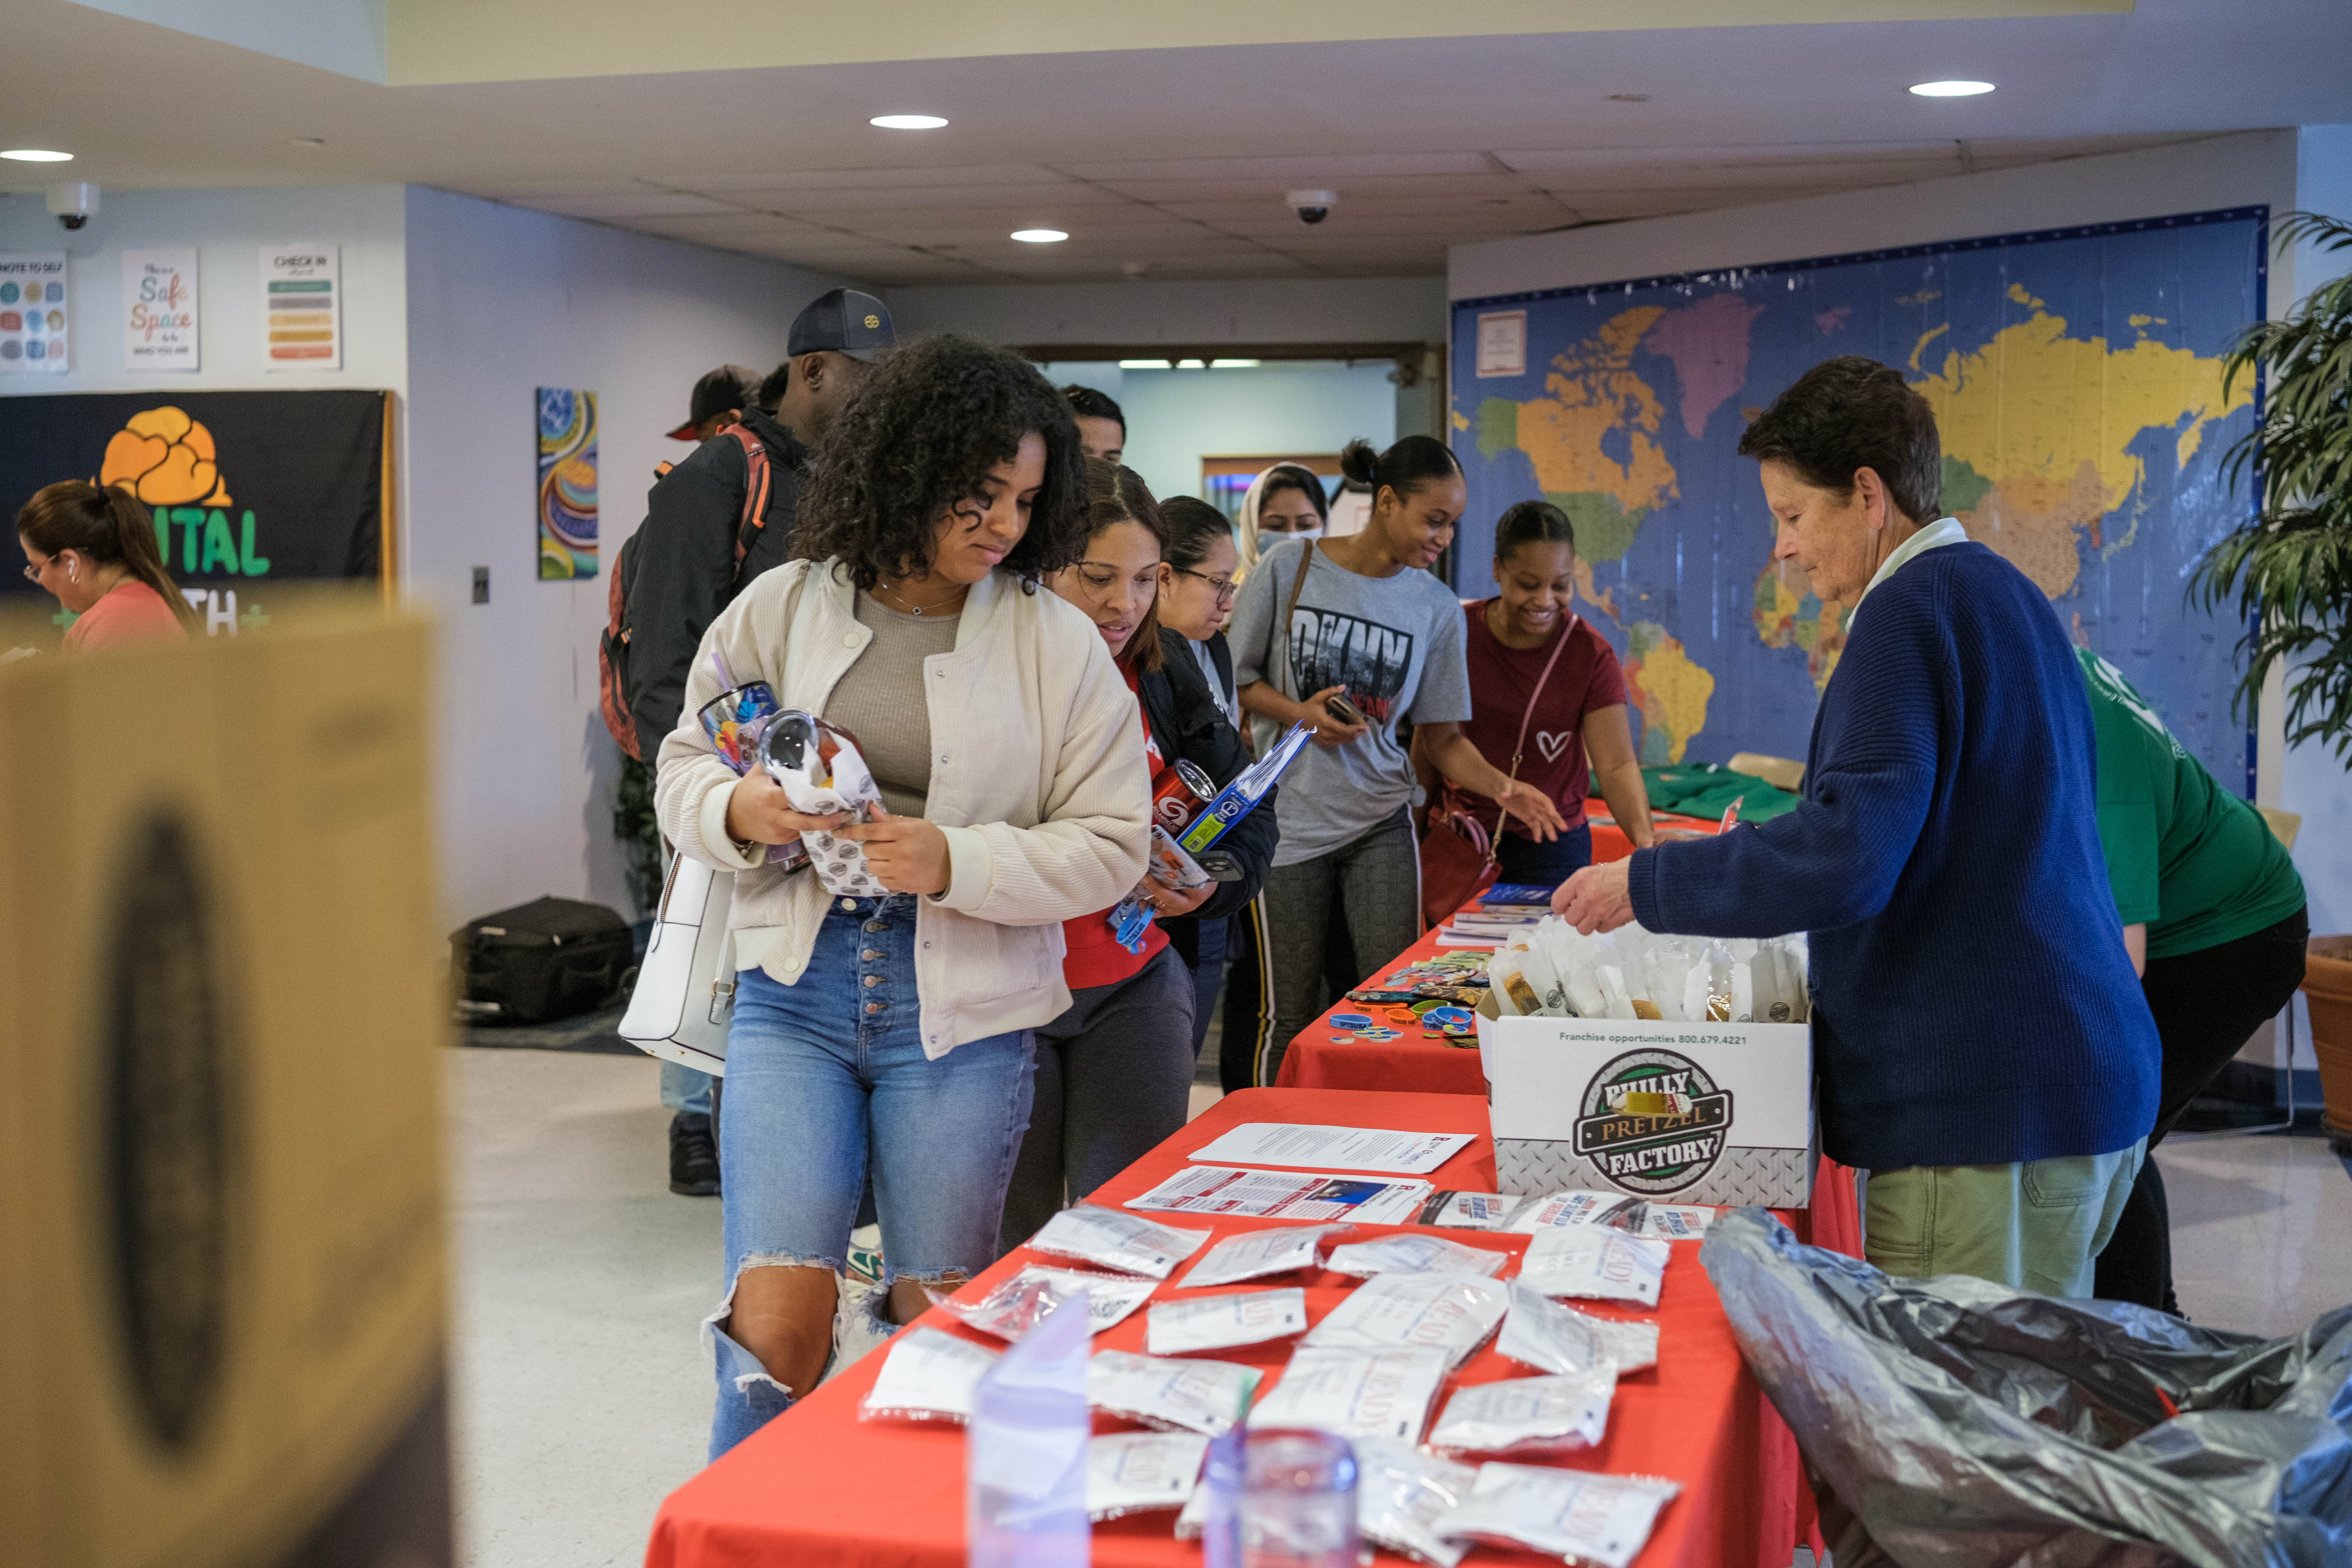 Earth Day event at the Worthington Atlantic City campus